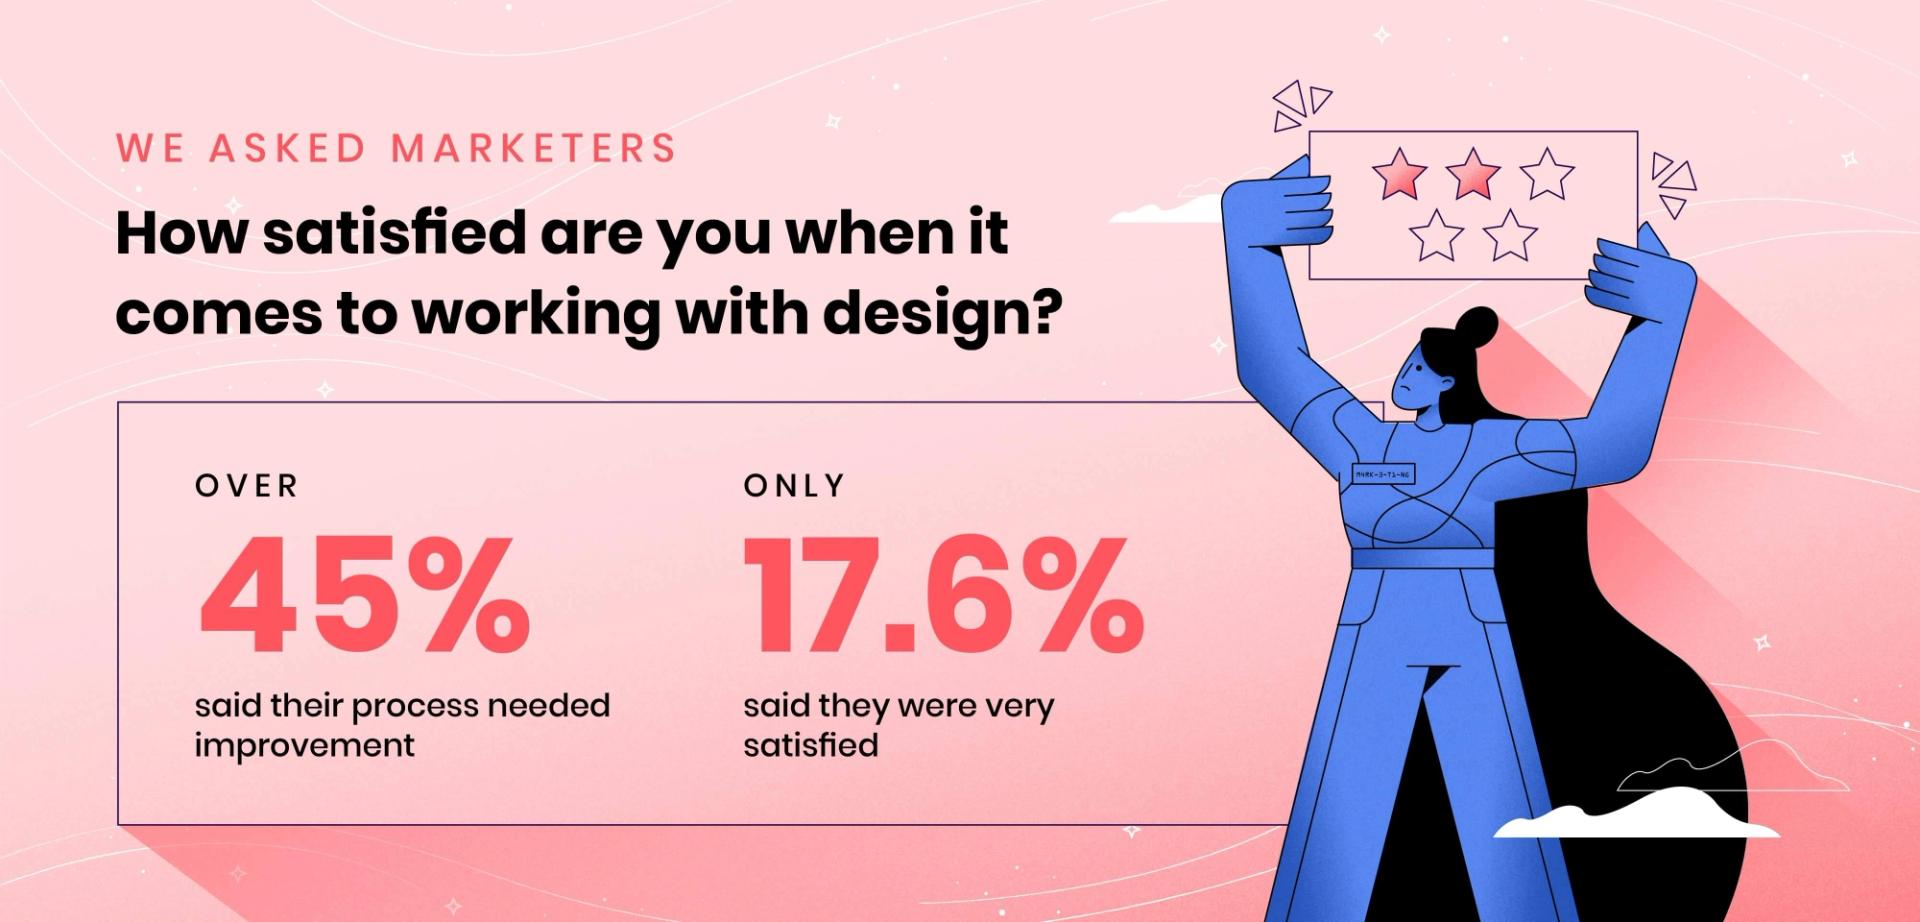 How satisfied are you when it comes to working with design?